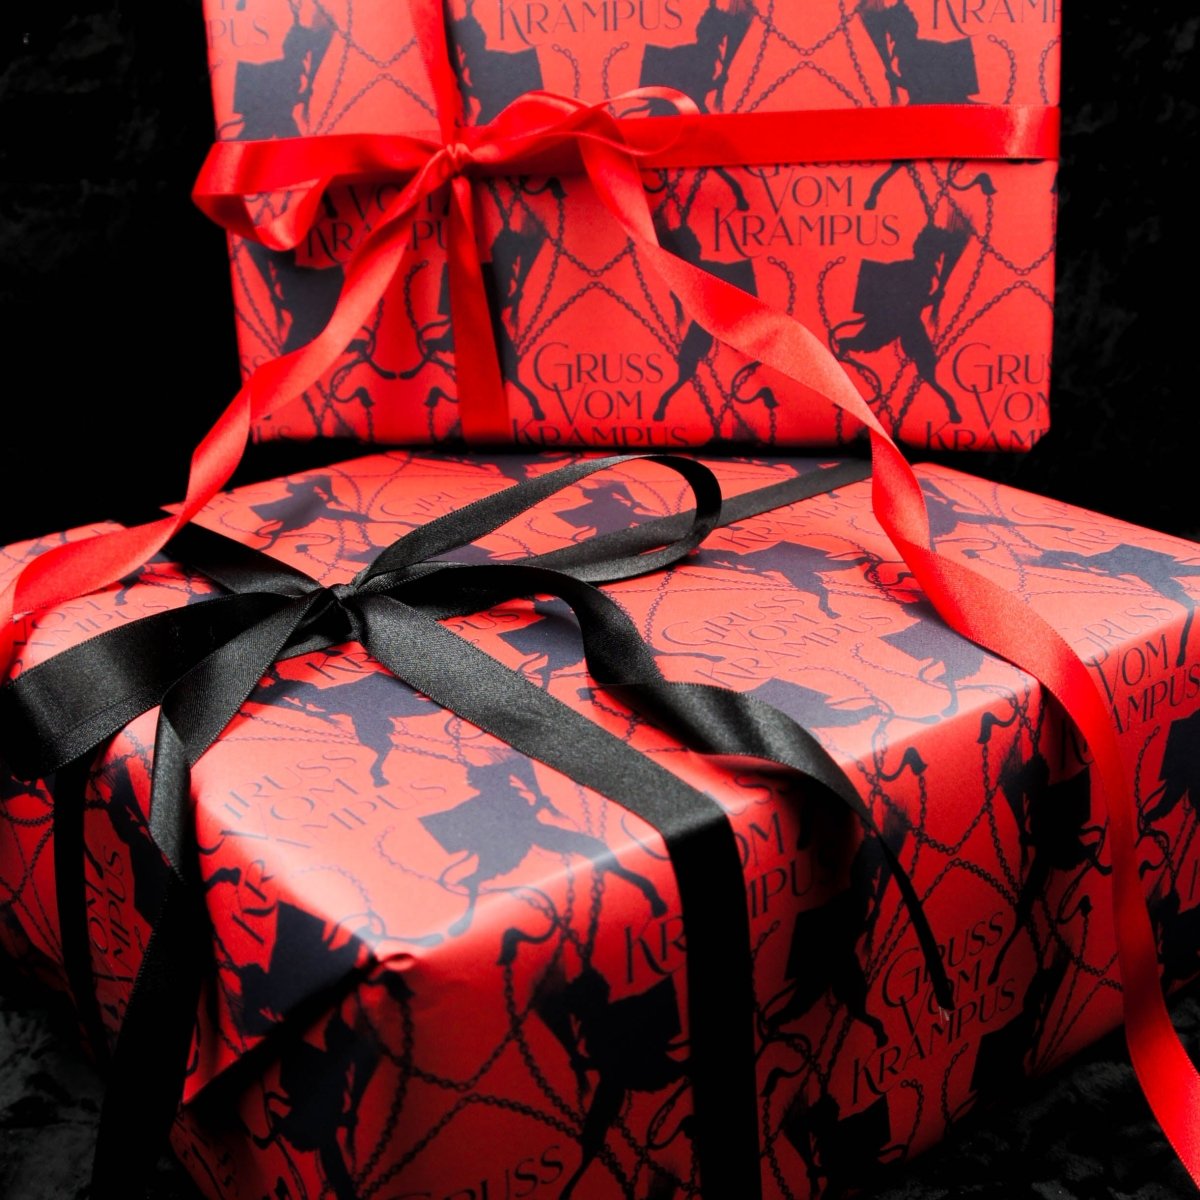 Exquisite Gothic Red Holiday Rose - Wrapping Paper - Set of 3 Sheets